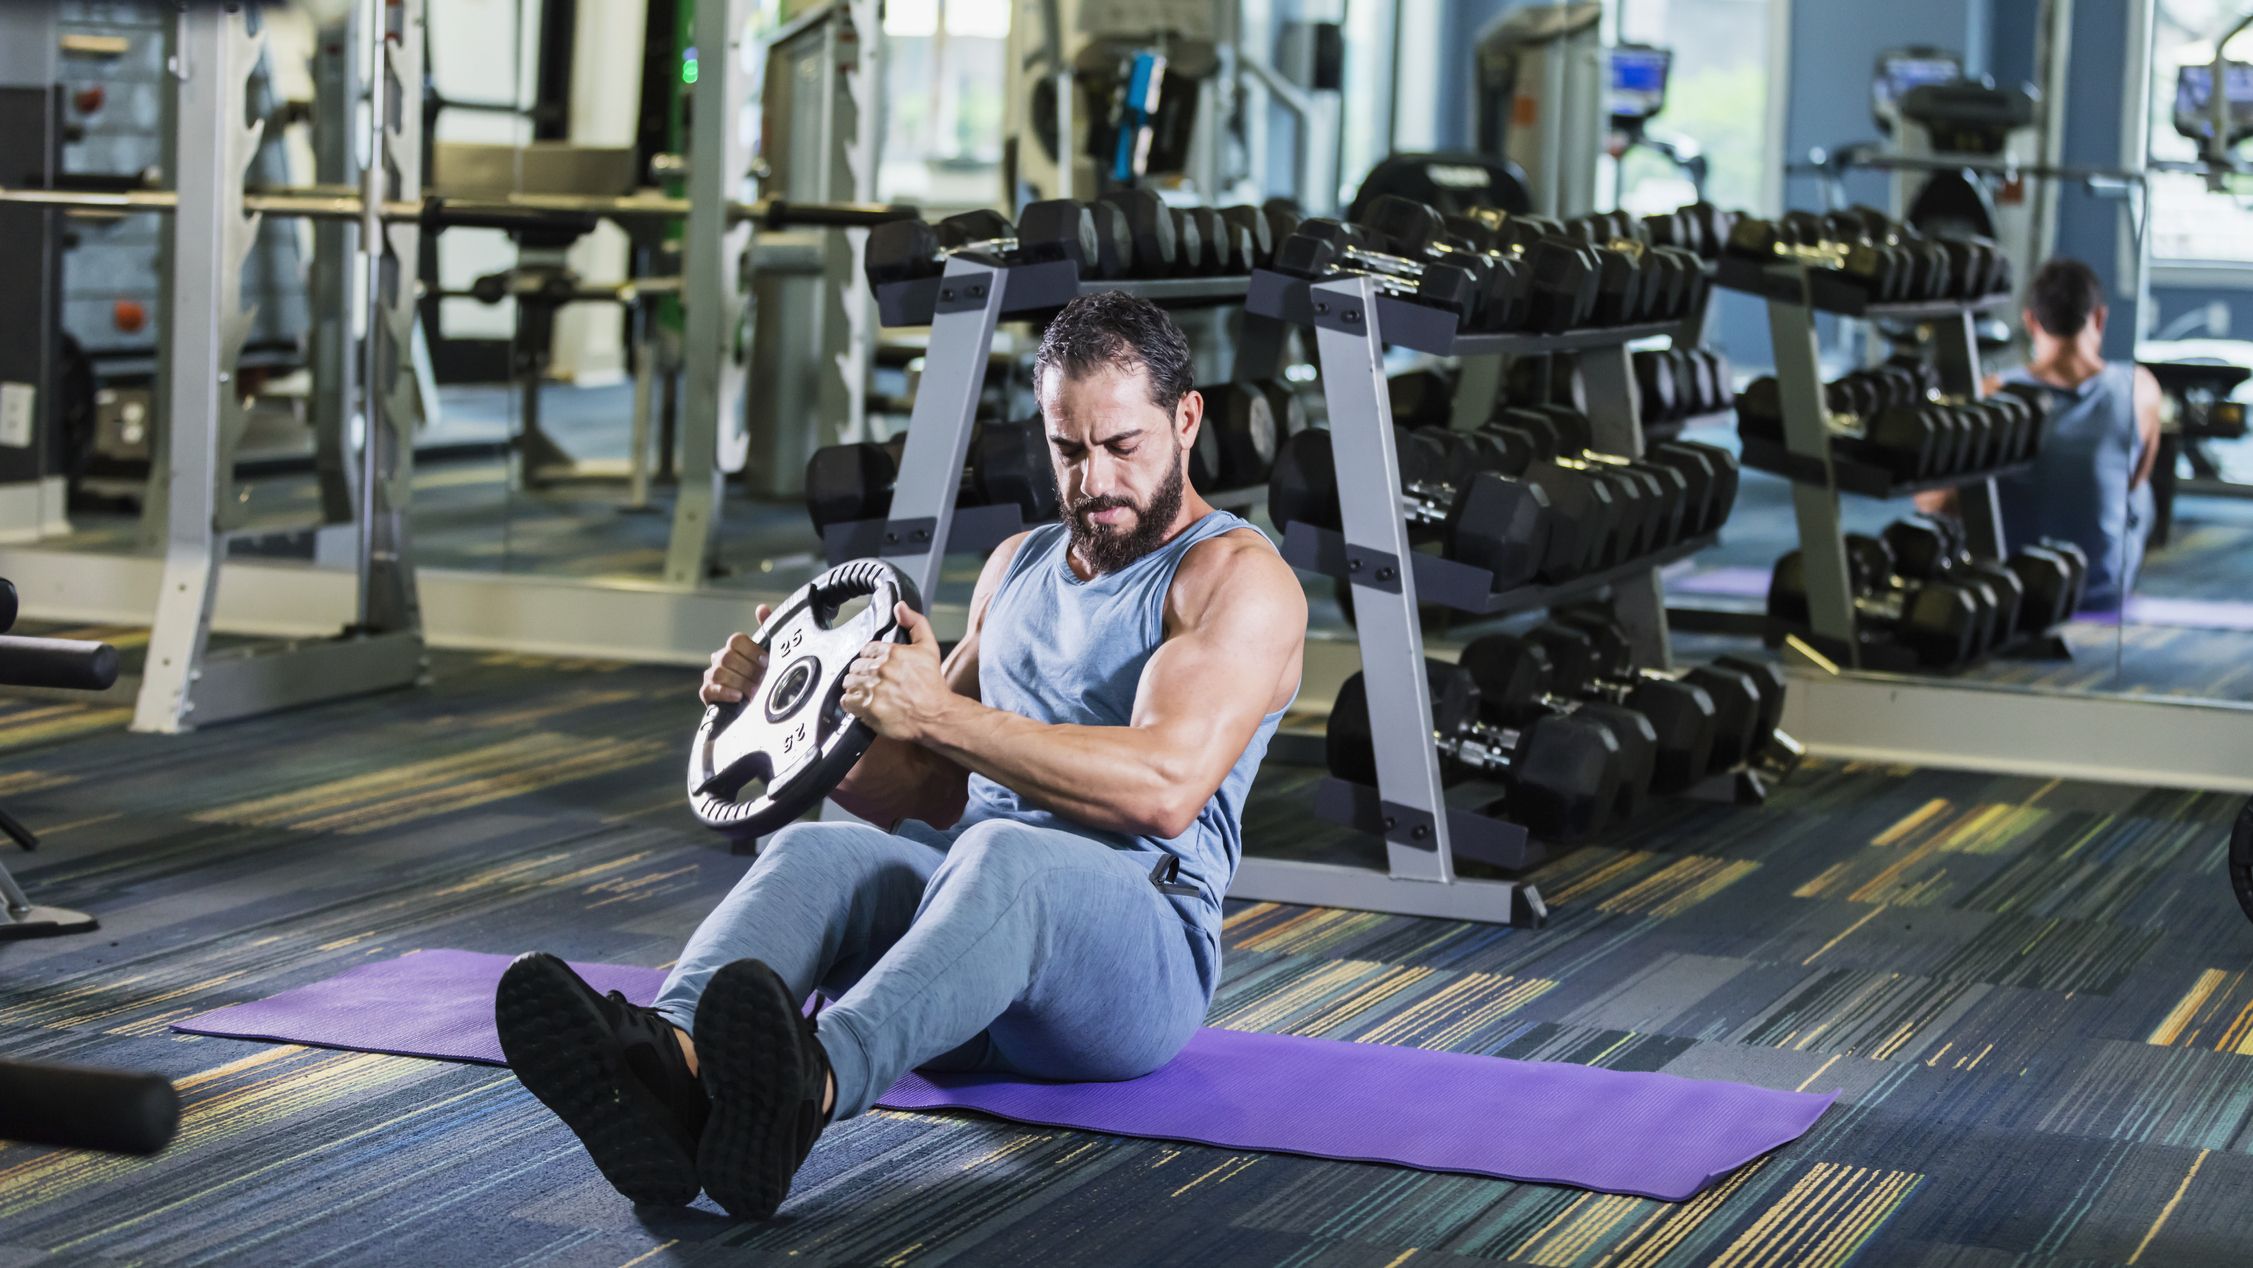 https://hips.hearstapps.com/hmg-prod/images/middle-eastern-man-exercising-at-the-gym-lifting-royalty-free-image-1690294922.jpg?crop=0.95265xw:1xh;center,top